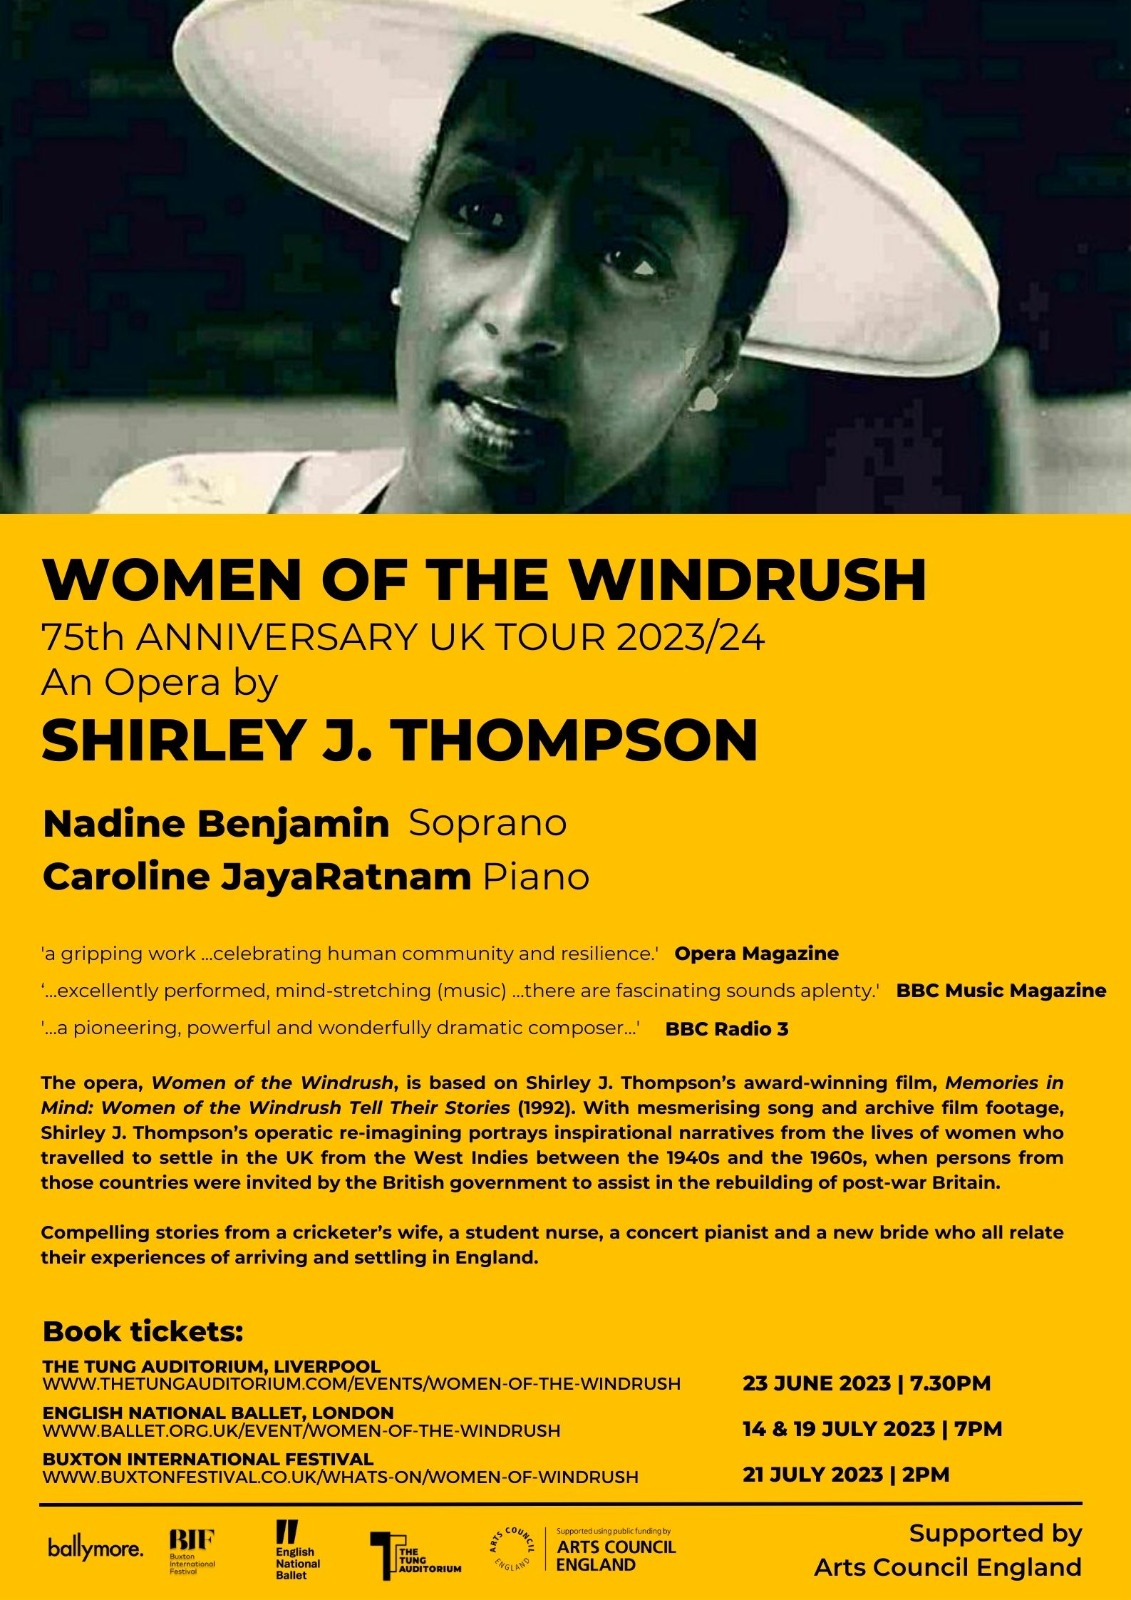 Women of the Windrush, through its captivating music and compelling storytelling, pays homage to the inspiring journeys of the Windrush Generation and their enduring legacy.